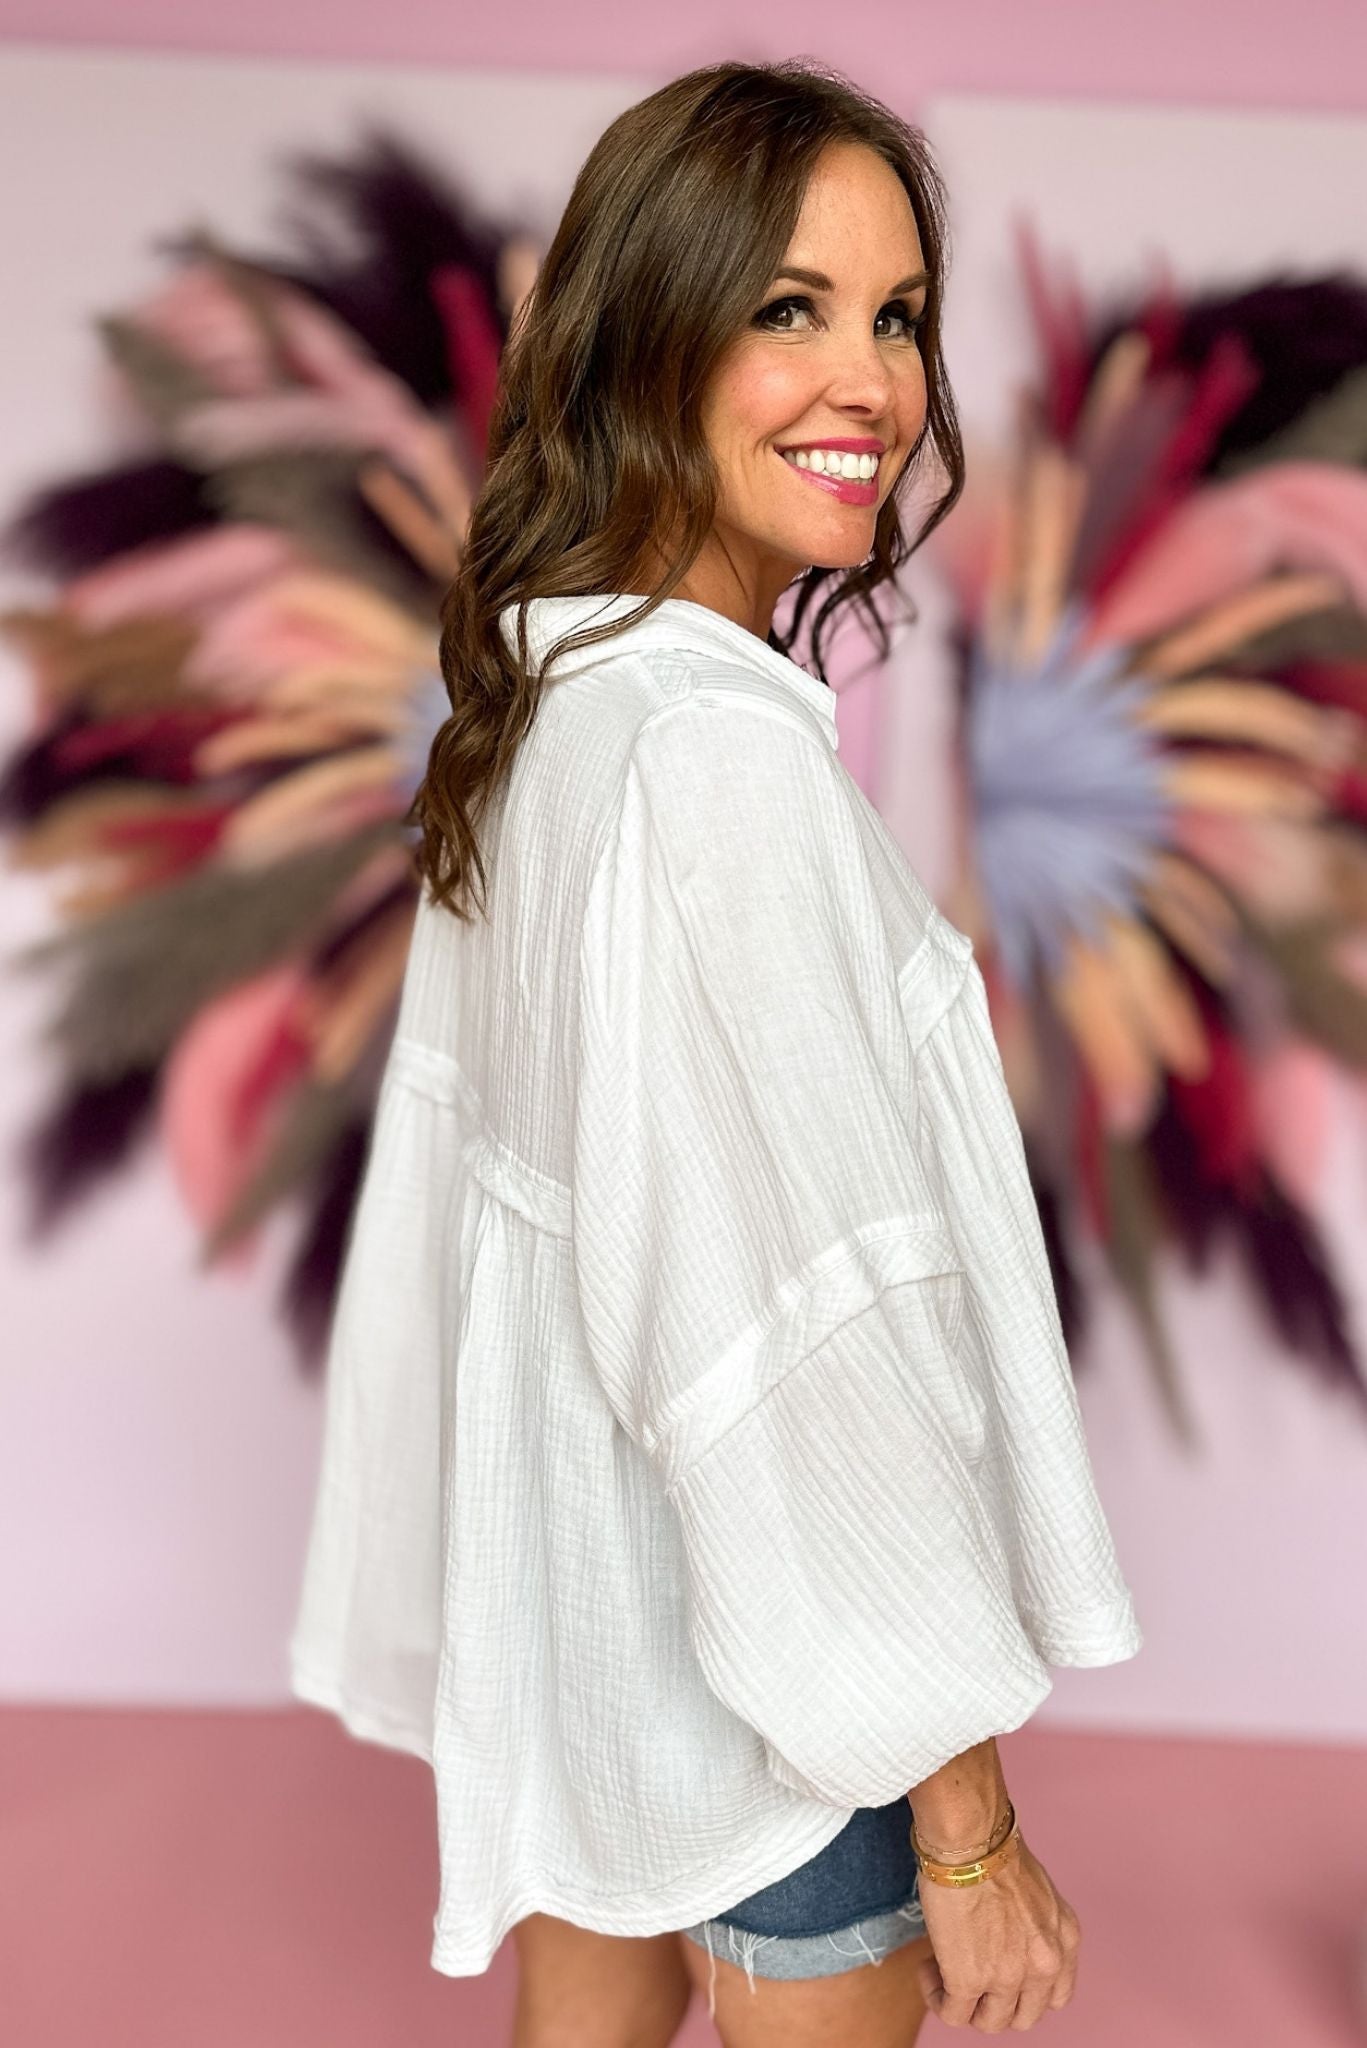 Load image into Gallery viewer, White Gauze Balloon Long Sleeve Babydoll Top, easy fit, flowy fit, summer look, must have, gauze material, collar detail, shop style your senses by mallory fitzsimmons
